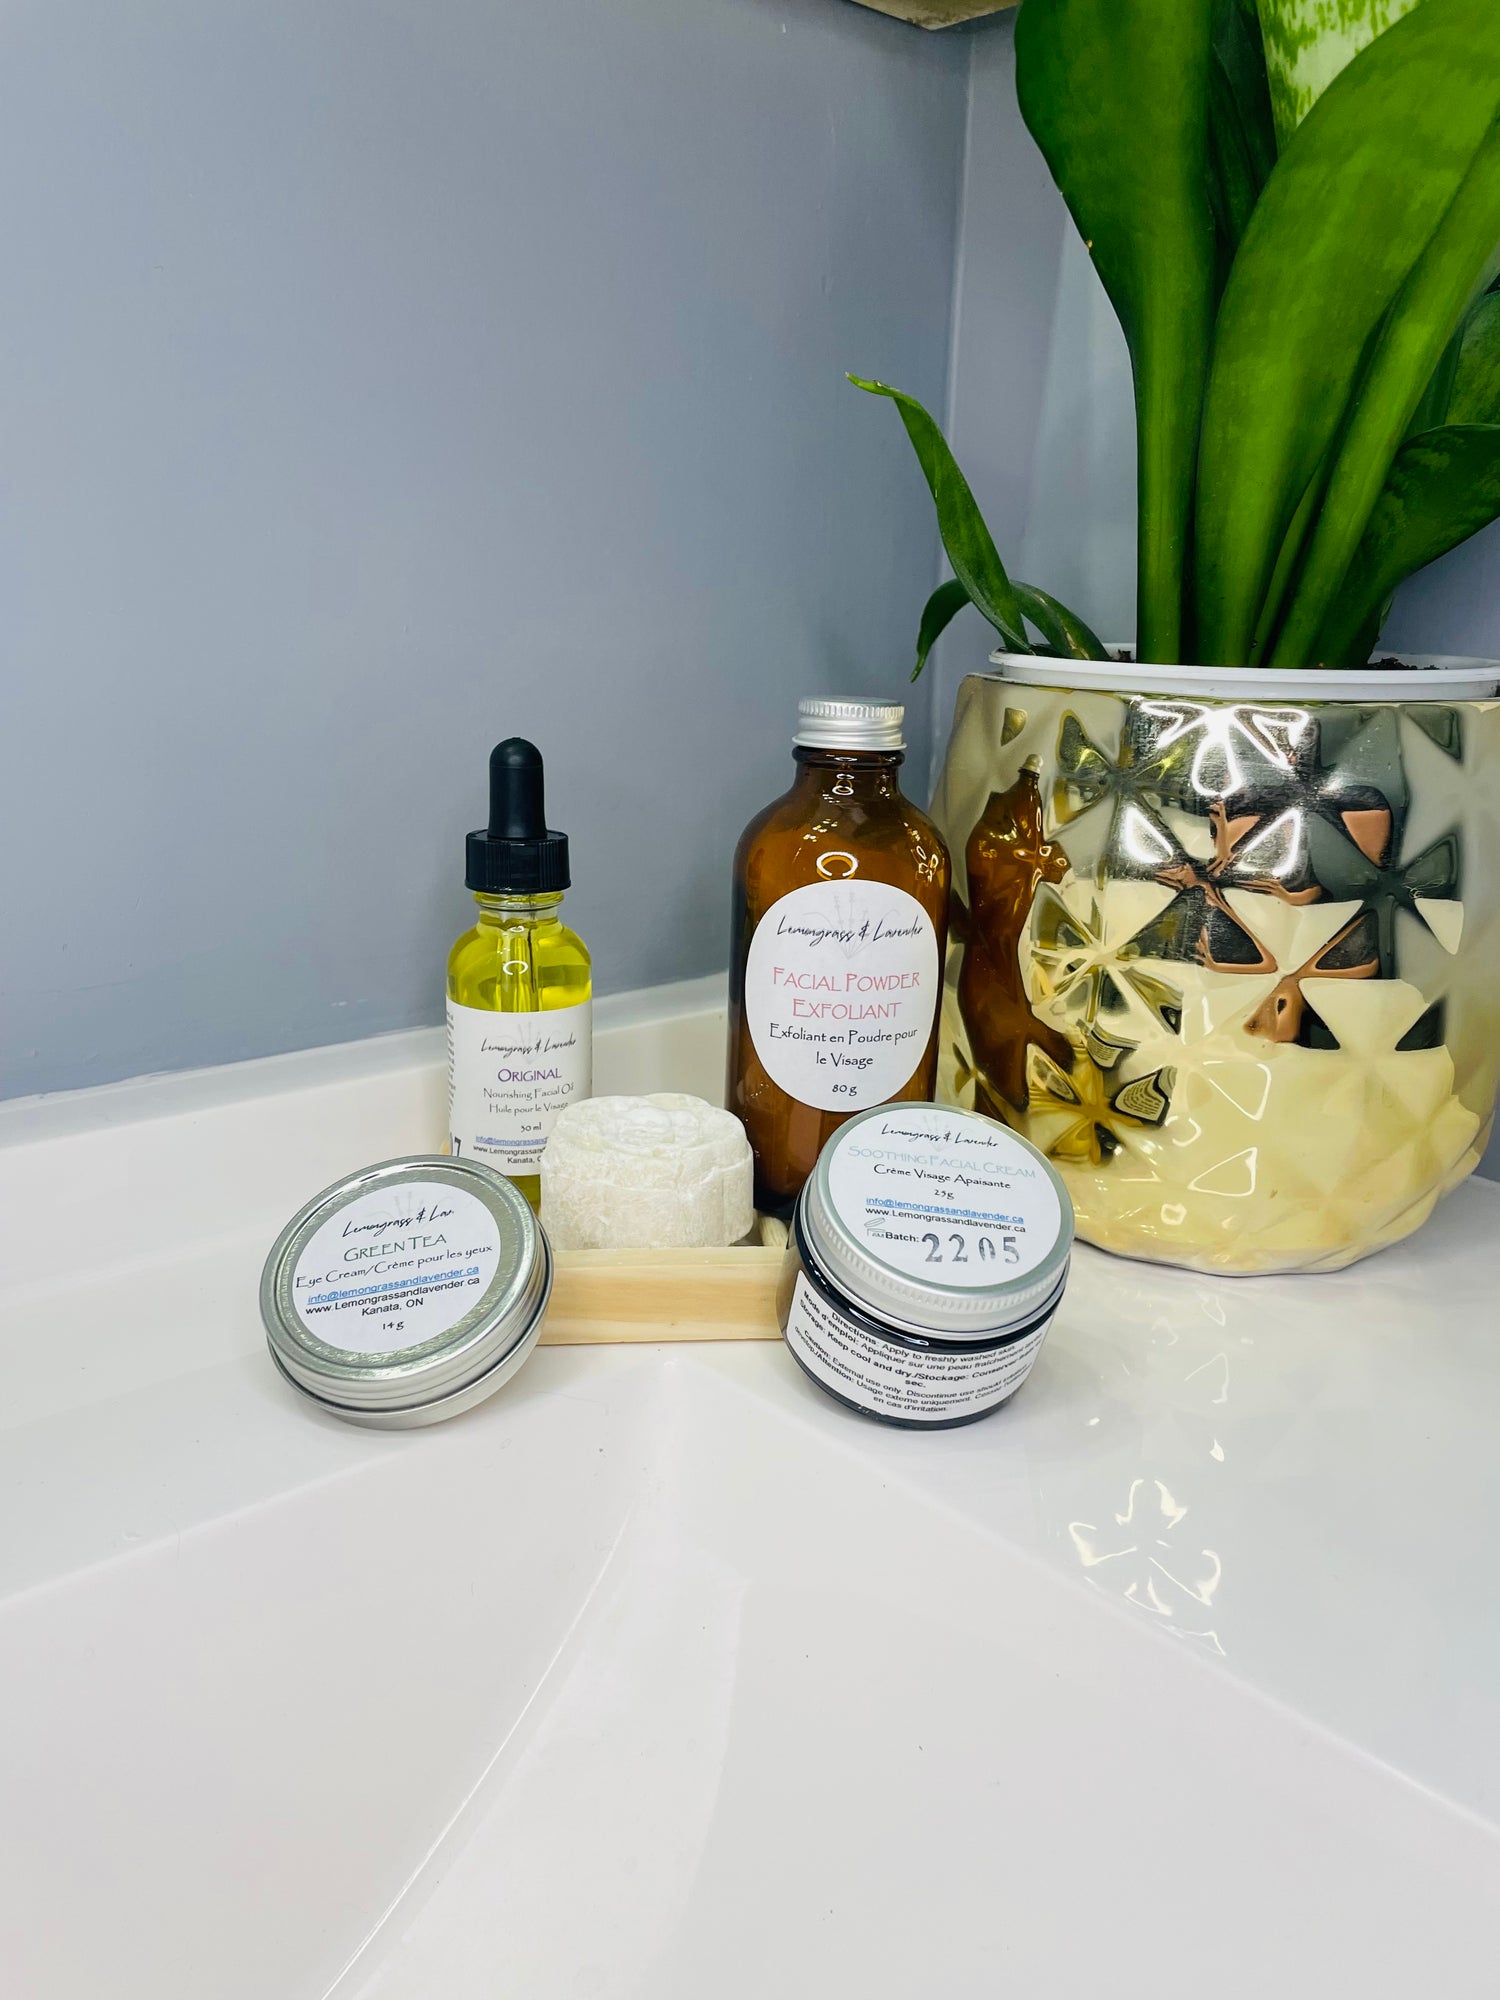 Image of Lemongrass & Lavender products on a bathroom vanity (products include: Nourishing Facial Oil - Original scent, Facial Powder Exfoliant, Facial Cleansing Bar, Green Tea Eye Cream, Soothing Facial Cream)